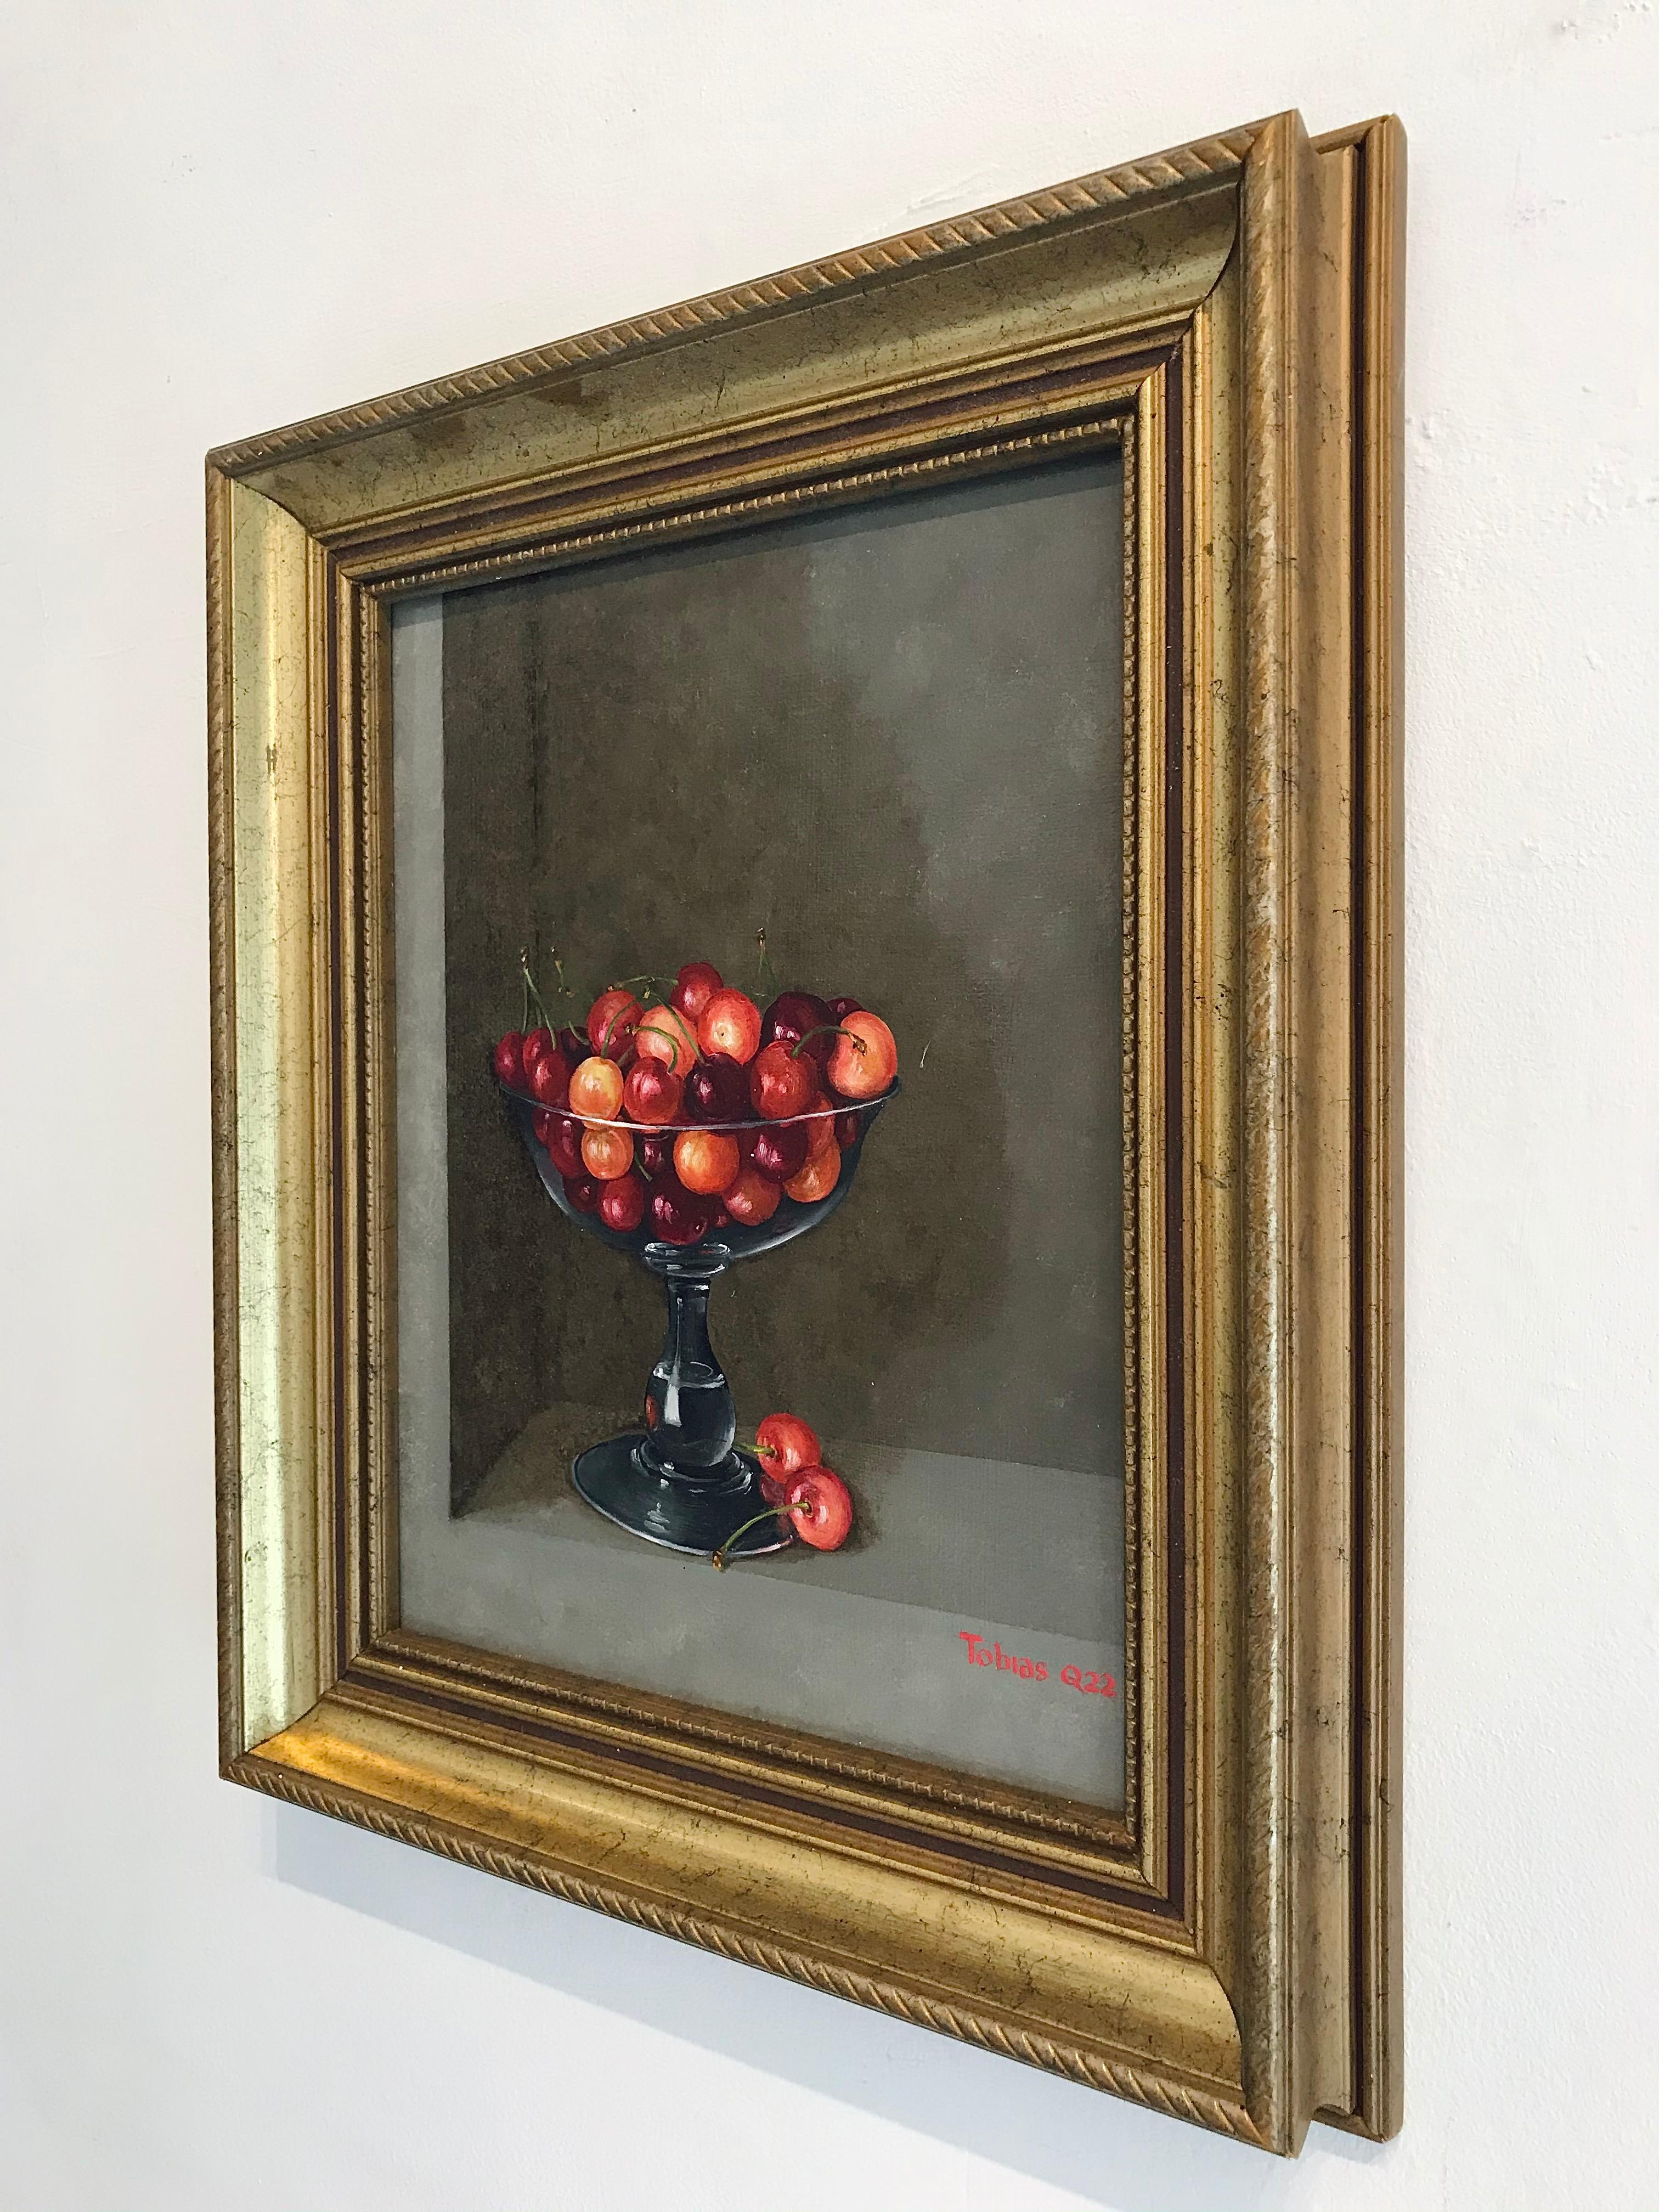 Cherries in a Glass-original realism still life oil painting-contemporary Art - Realist Painting by Tobias Harrison